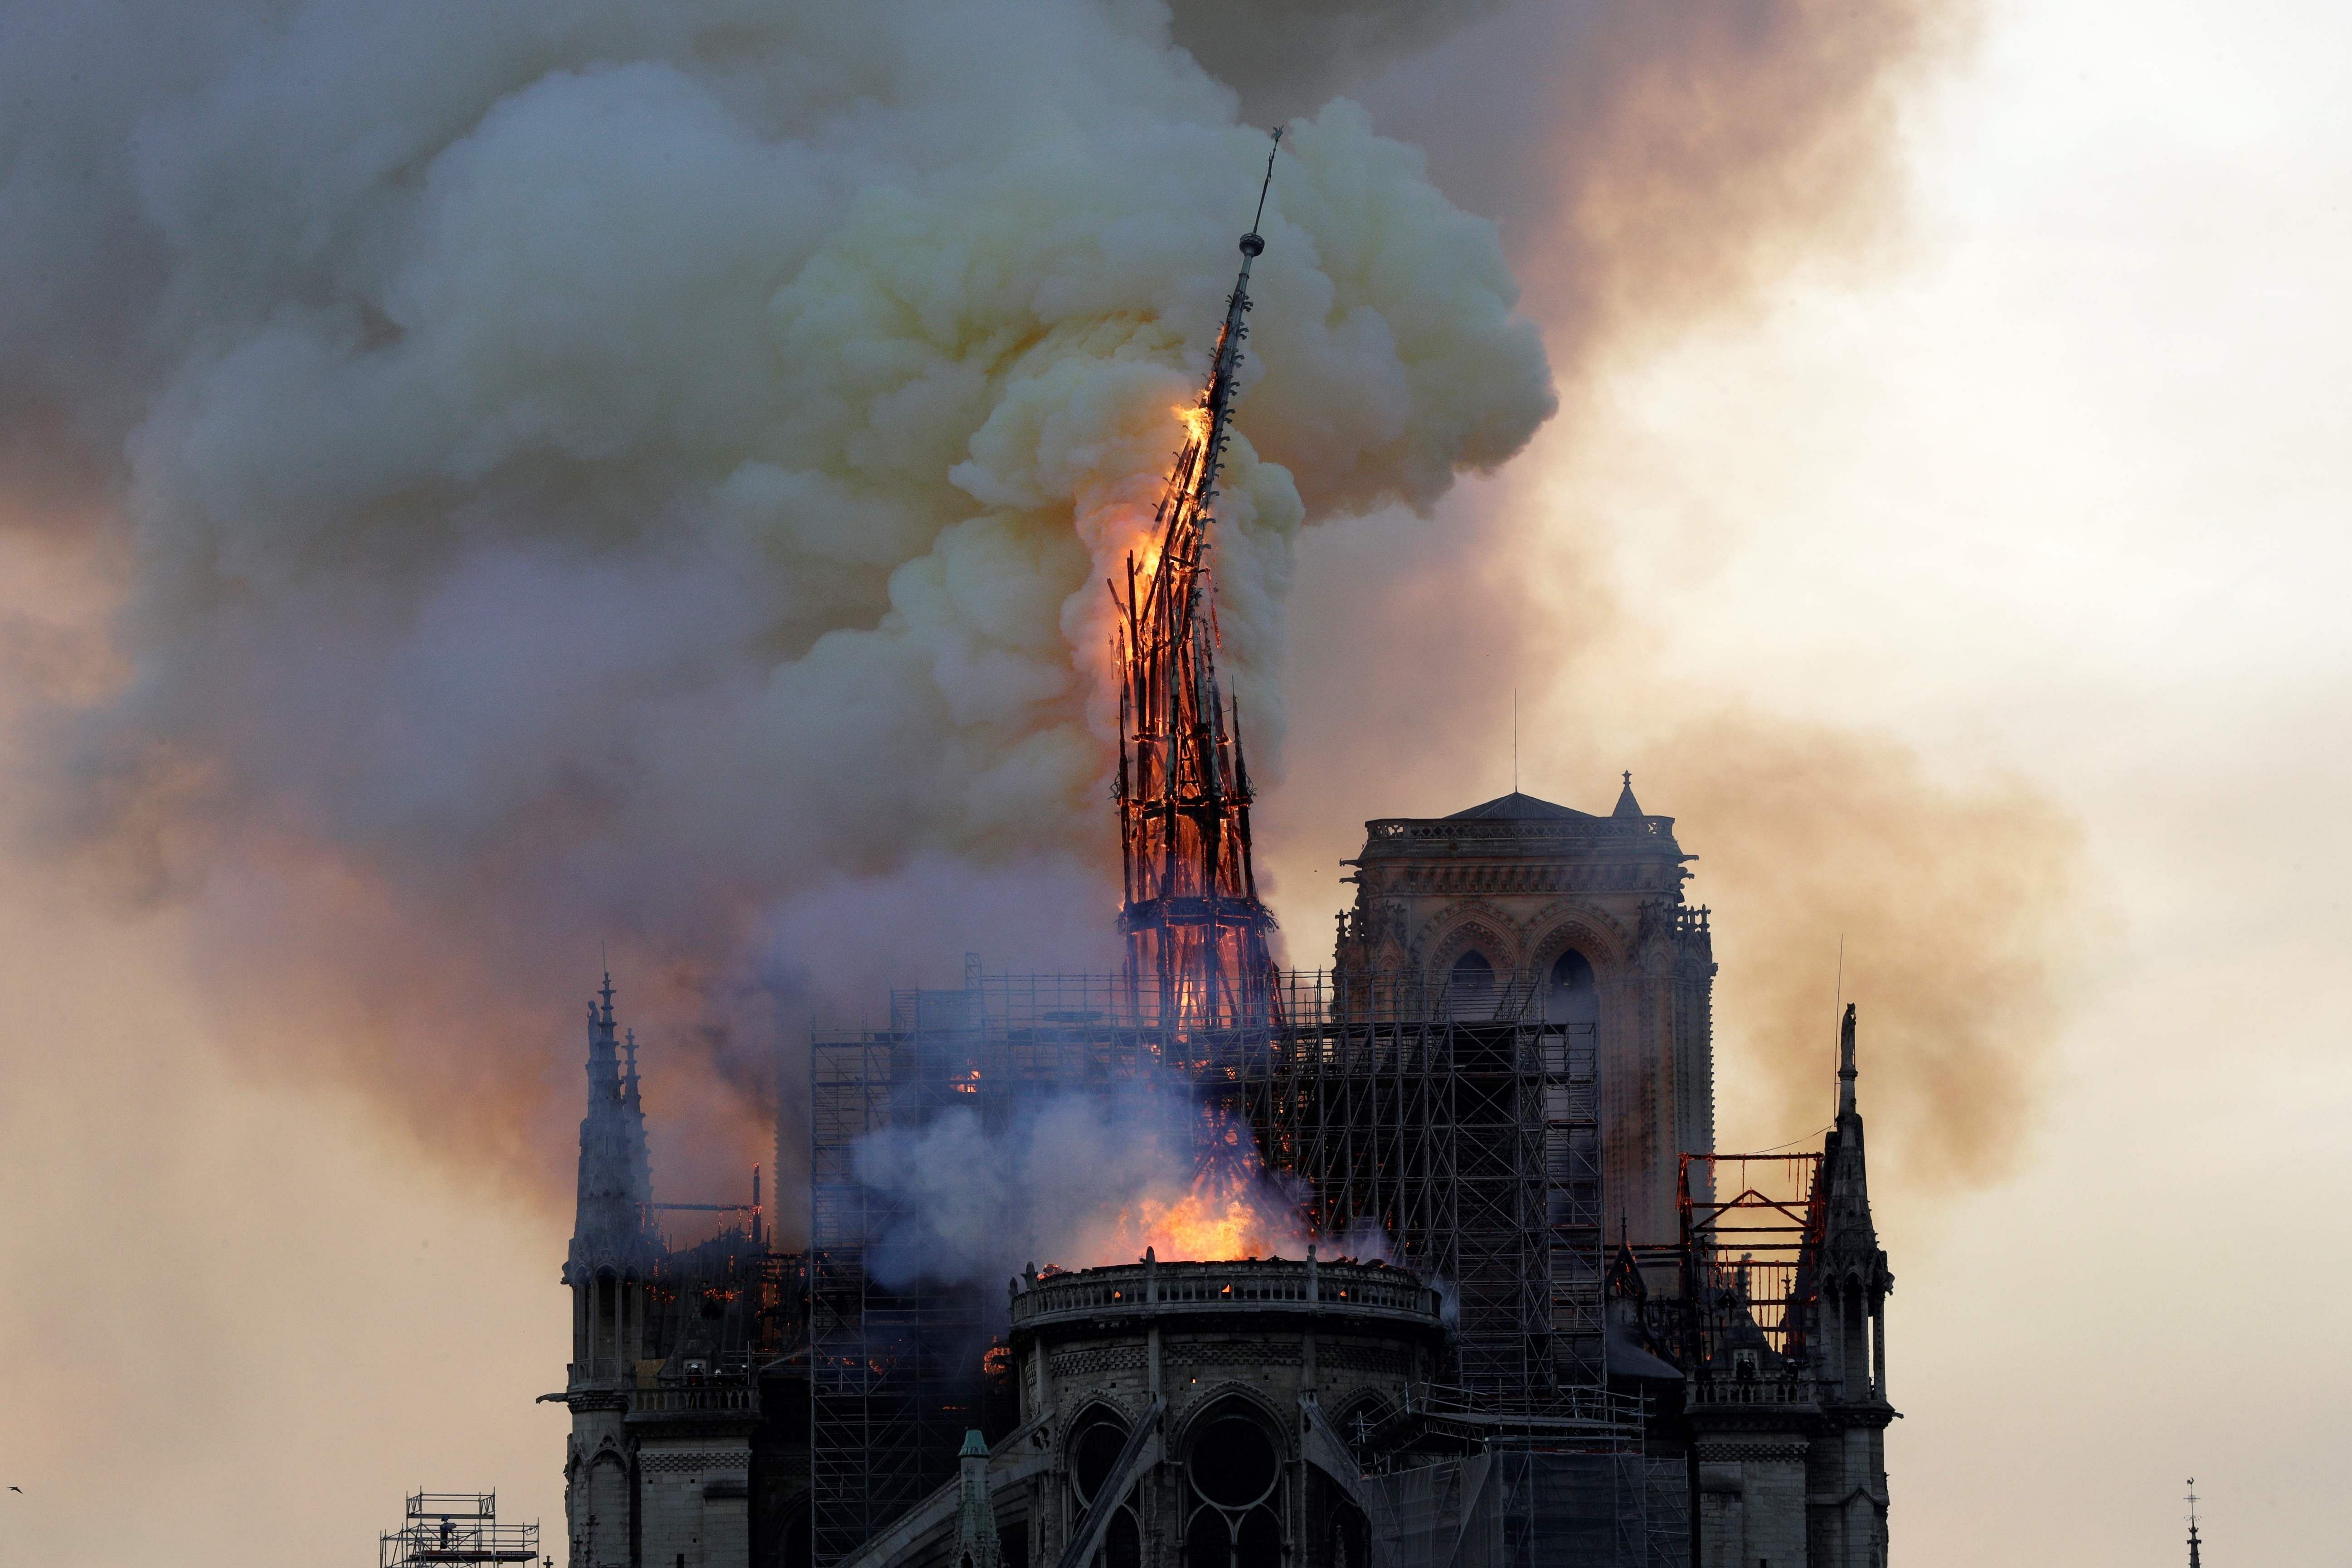 In this file photo taken on April 15, 2019 The steeple and spire of the landmark Notre-Dame Cathedral collapses as the cathedral is engulfed in flames in central Paris. - Emmanuel Macron, who had considered to rebuild Notre-Dame with a new contemporary spire after the blaze, is now coonvinced that the cathedral and its spire must be restored as they were. (Photo by AFP)